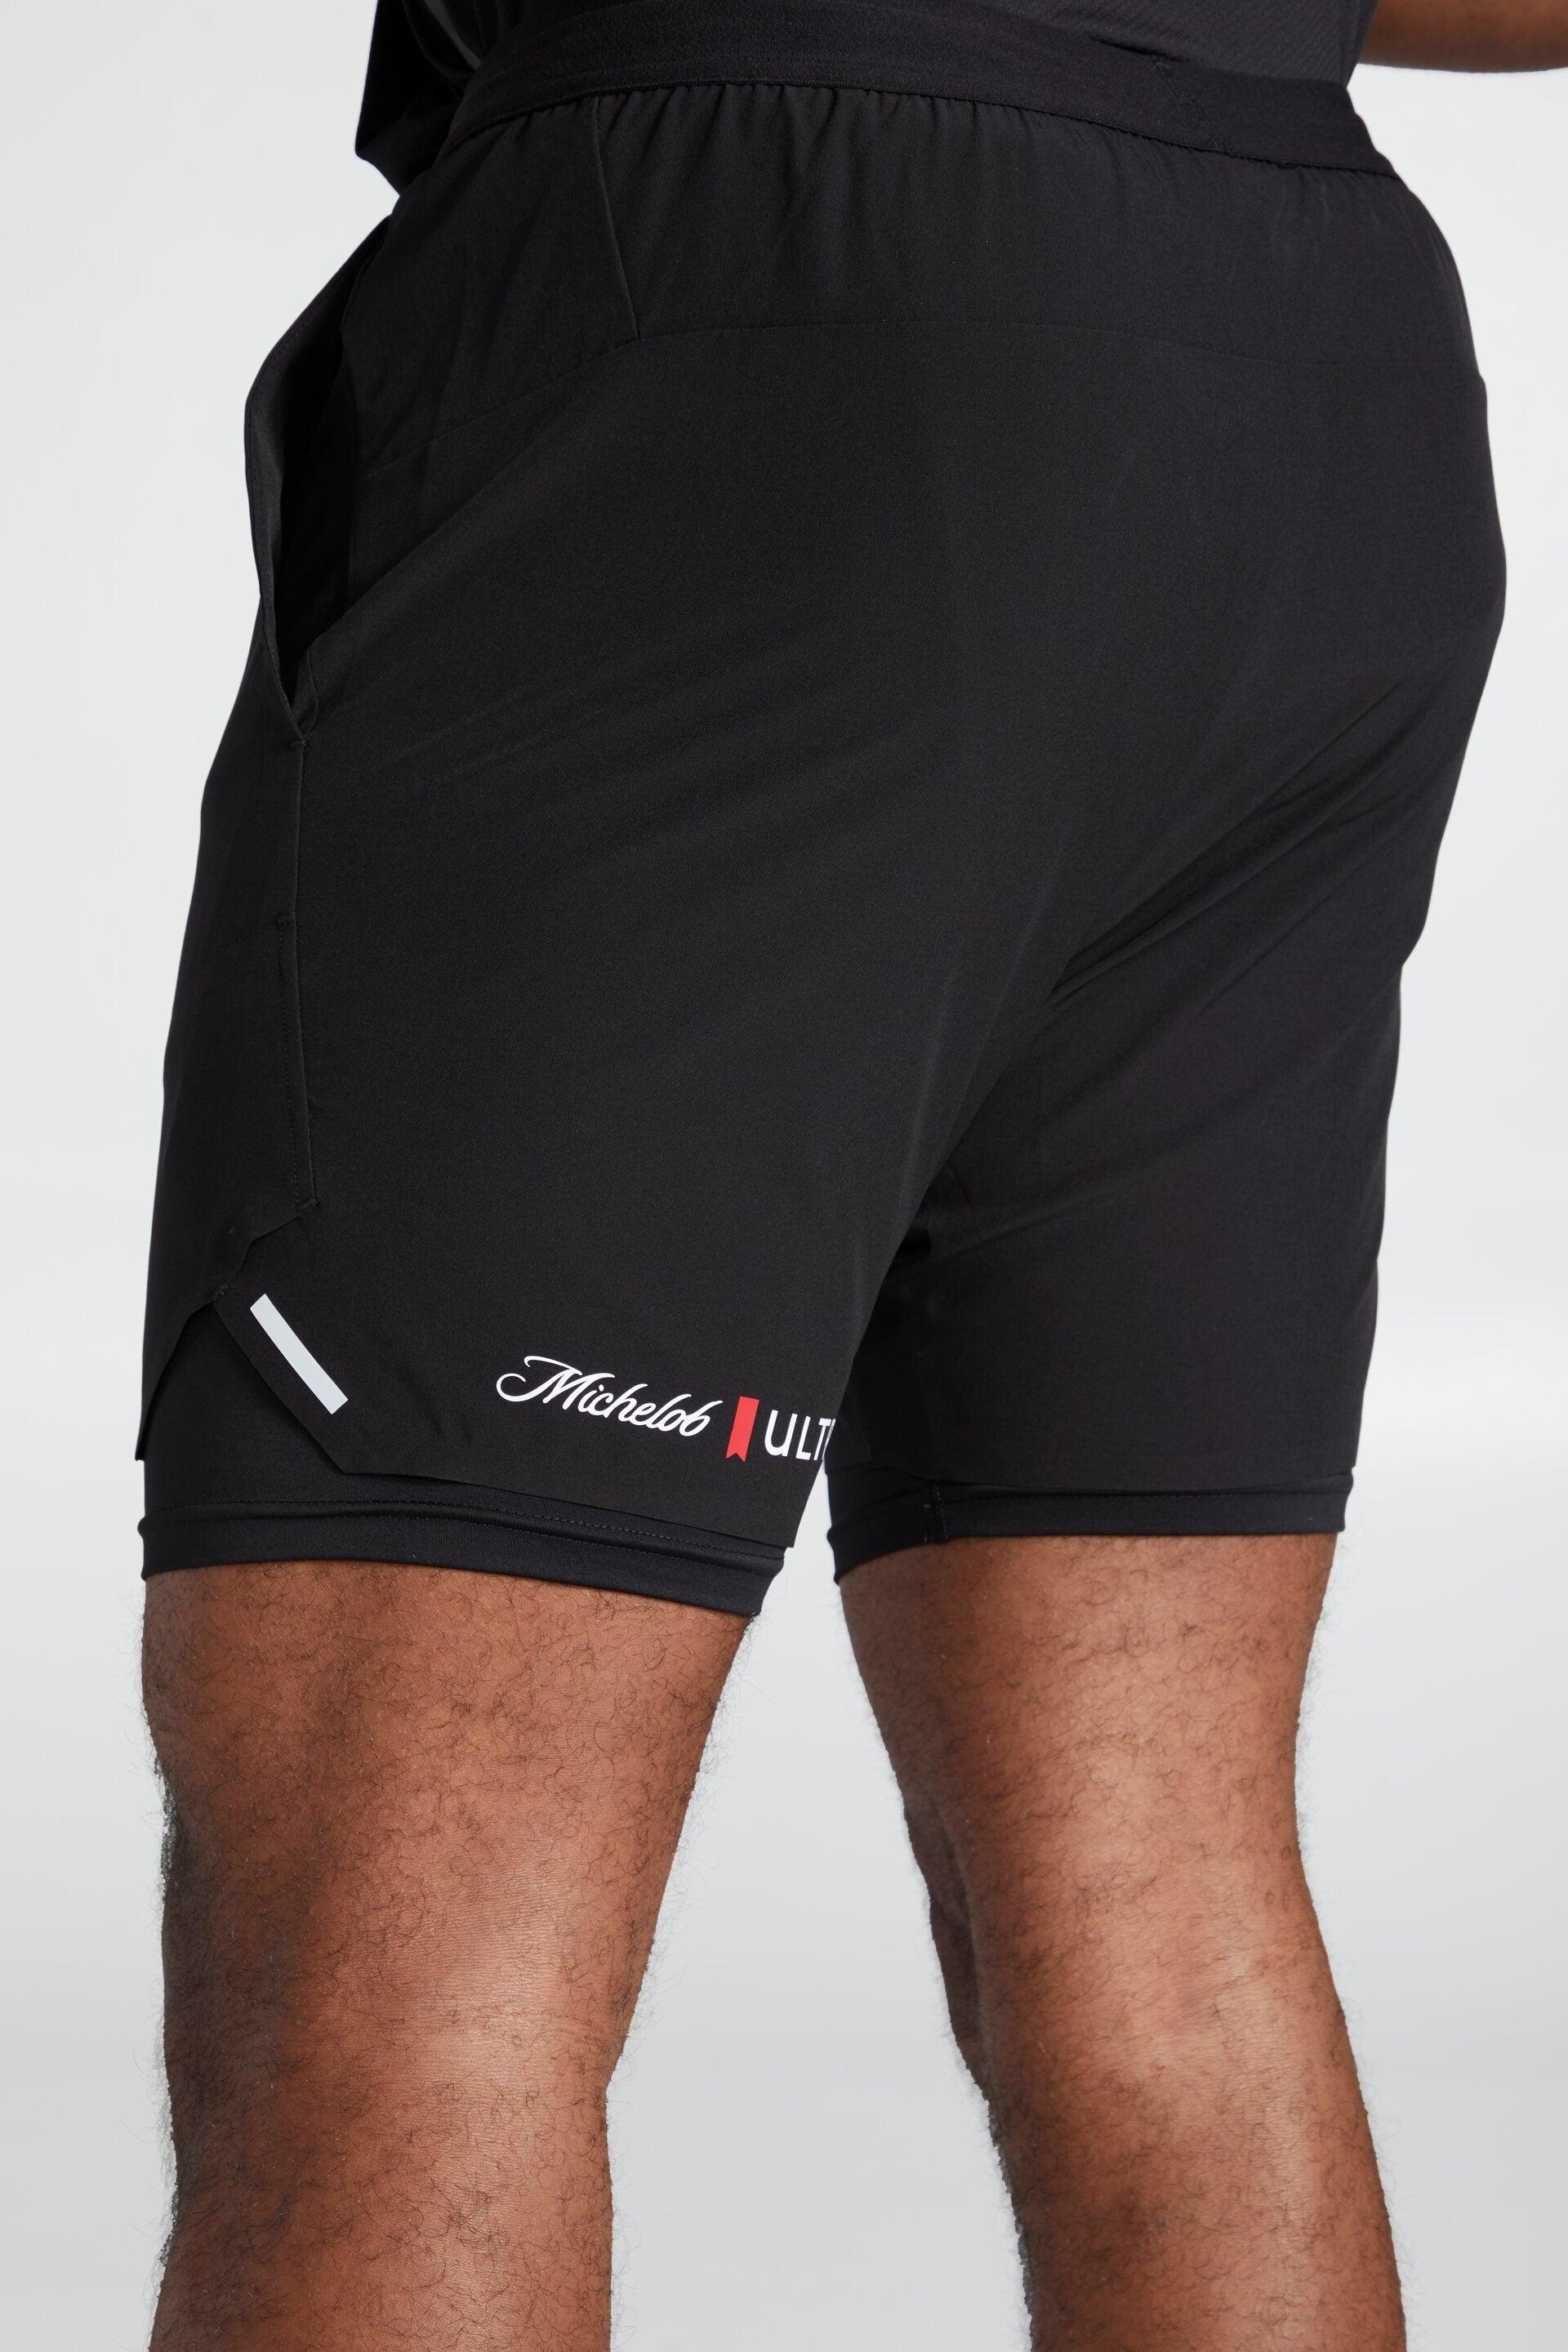 ULTRA x BYLT mens shorts with Michelob ULTRA logo on the back left thigh